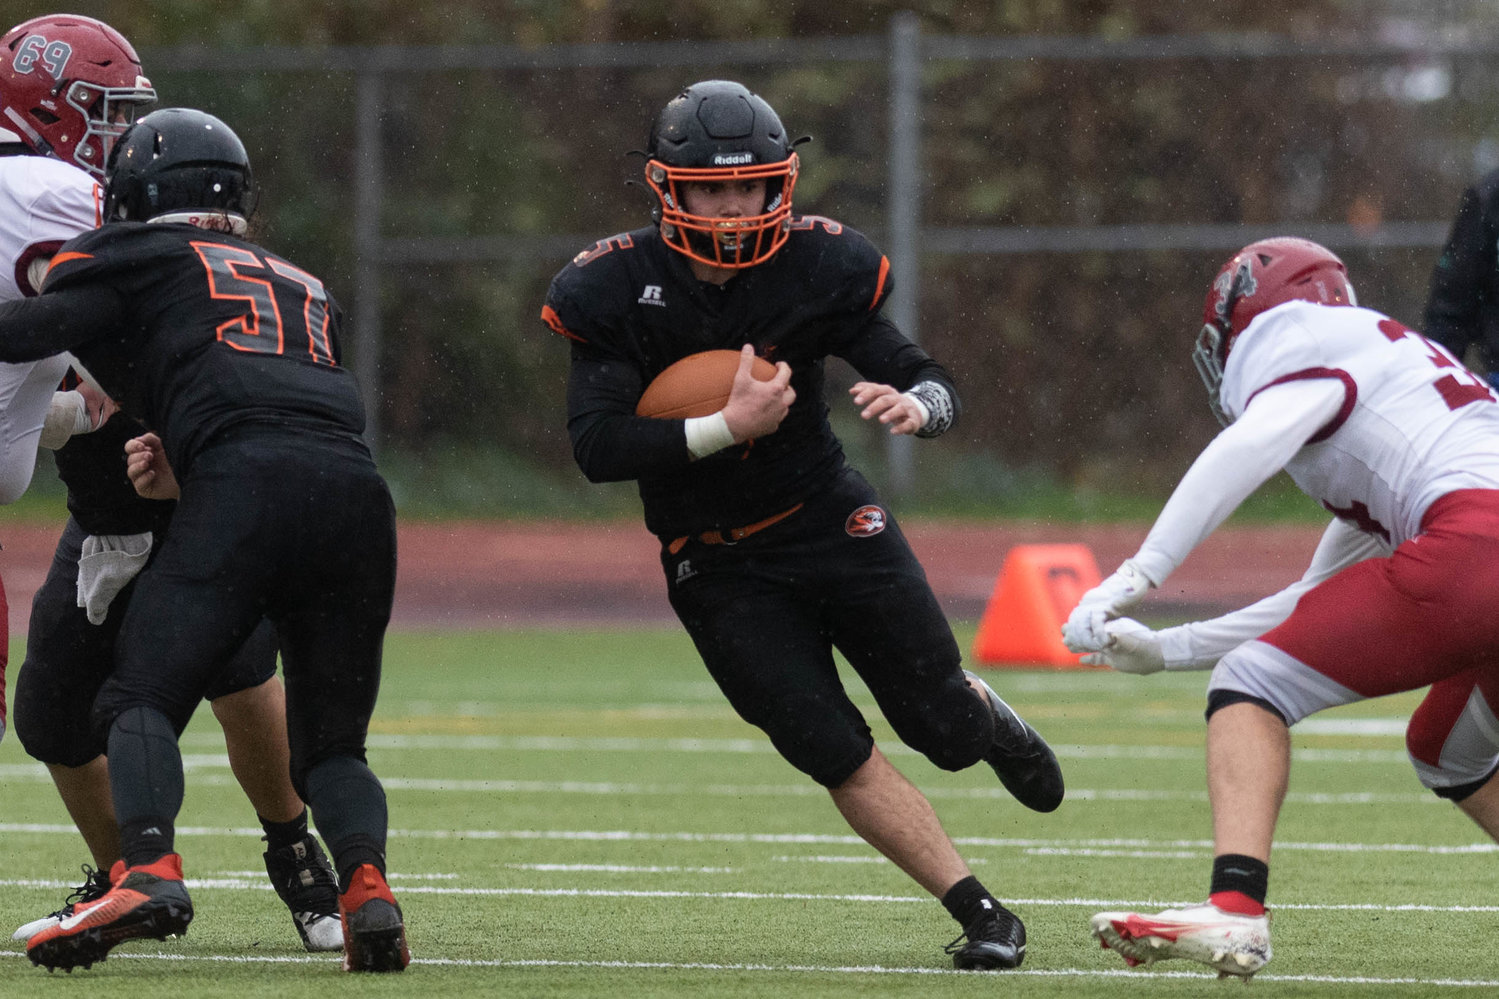 Napavine tailback Gavin Parker takes a carry for a big gain against Okanogan in the 2B state semis at Tumwater Nov. 27.